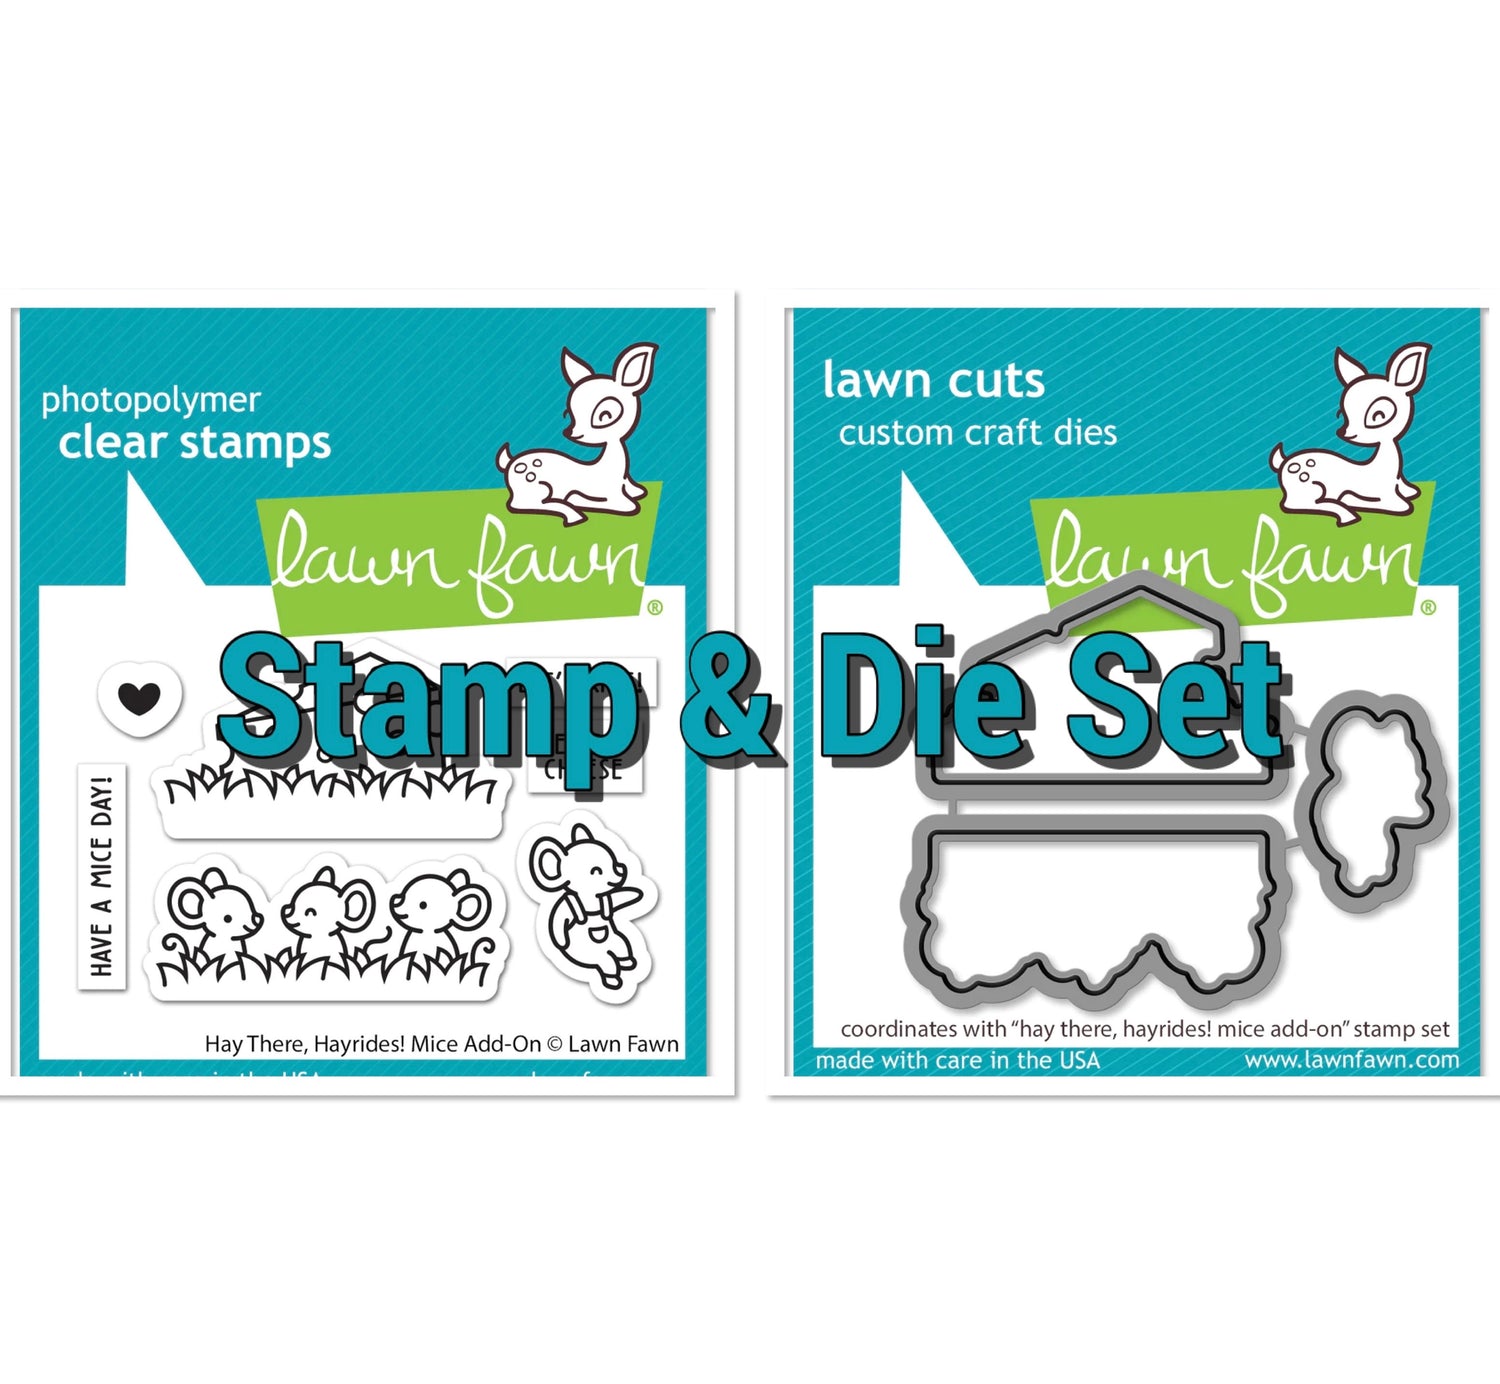 Lawn Fawn HAY THERE, HAYRIDES! MICE ADD-ON Stamps &amp; Die SET